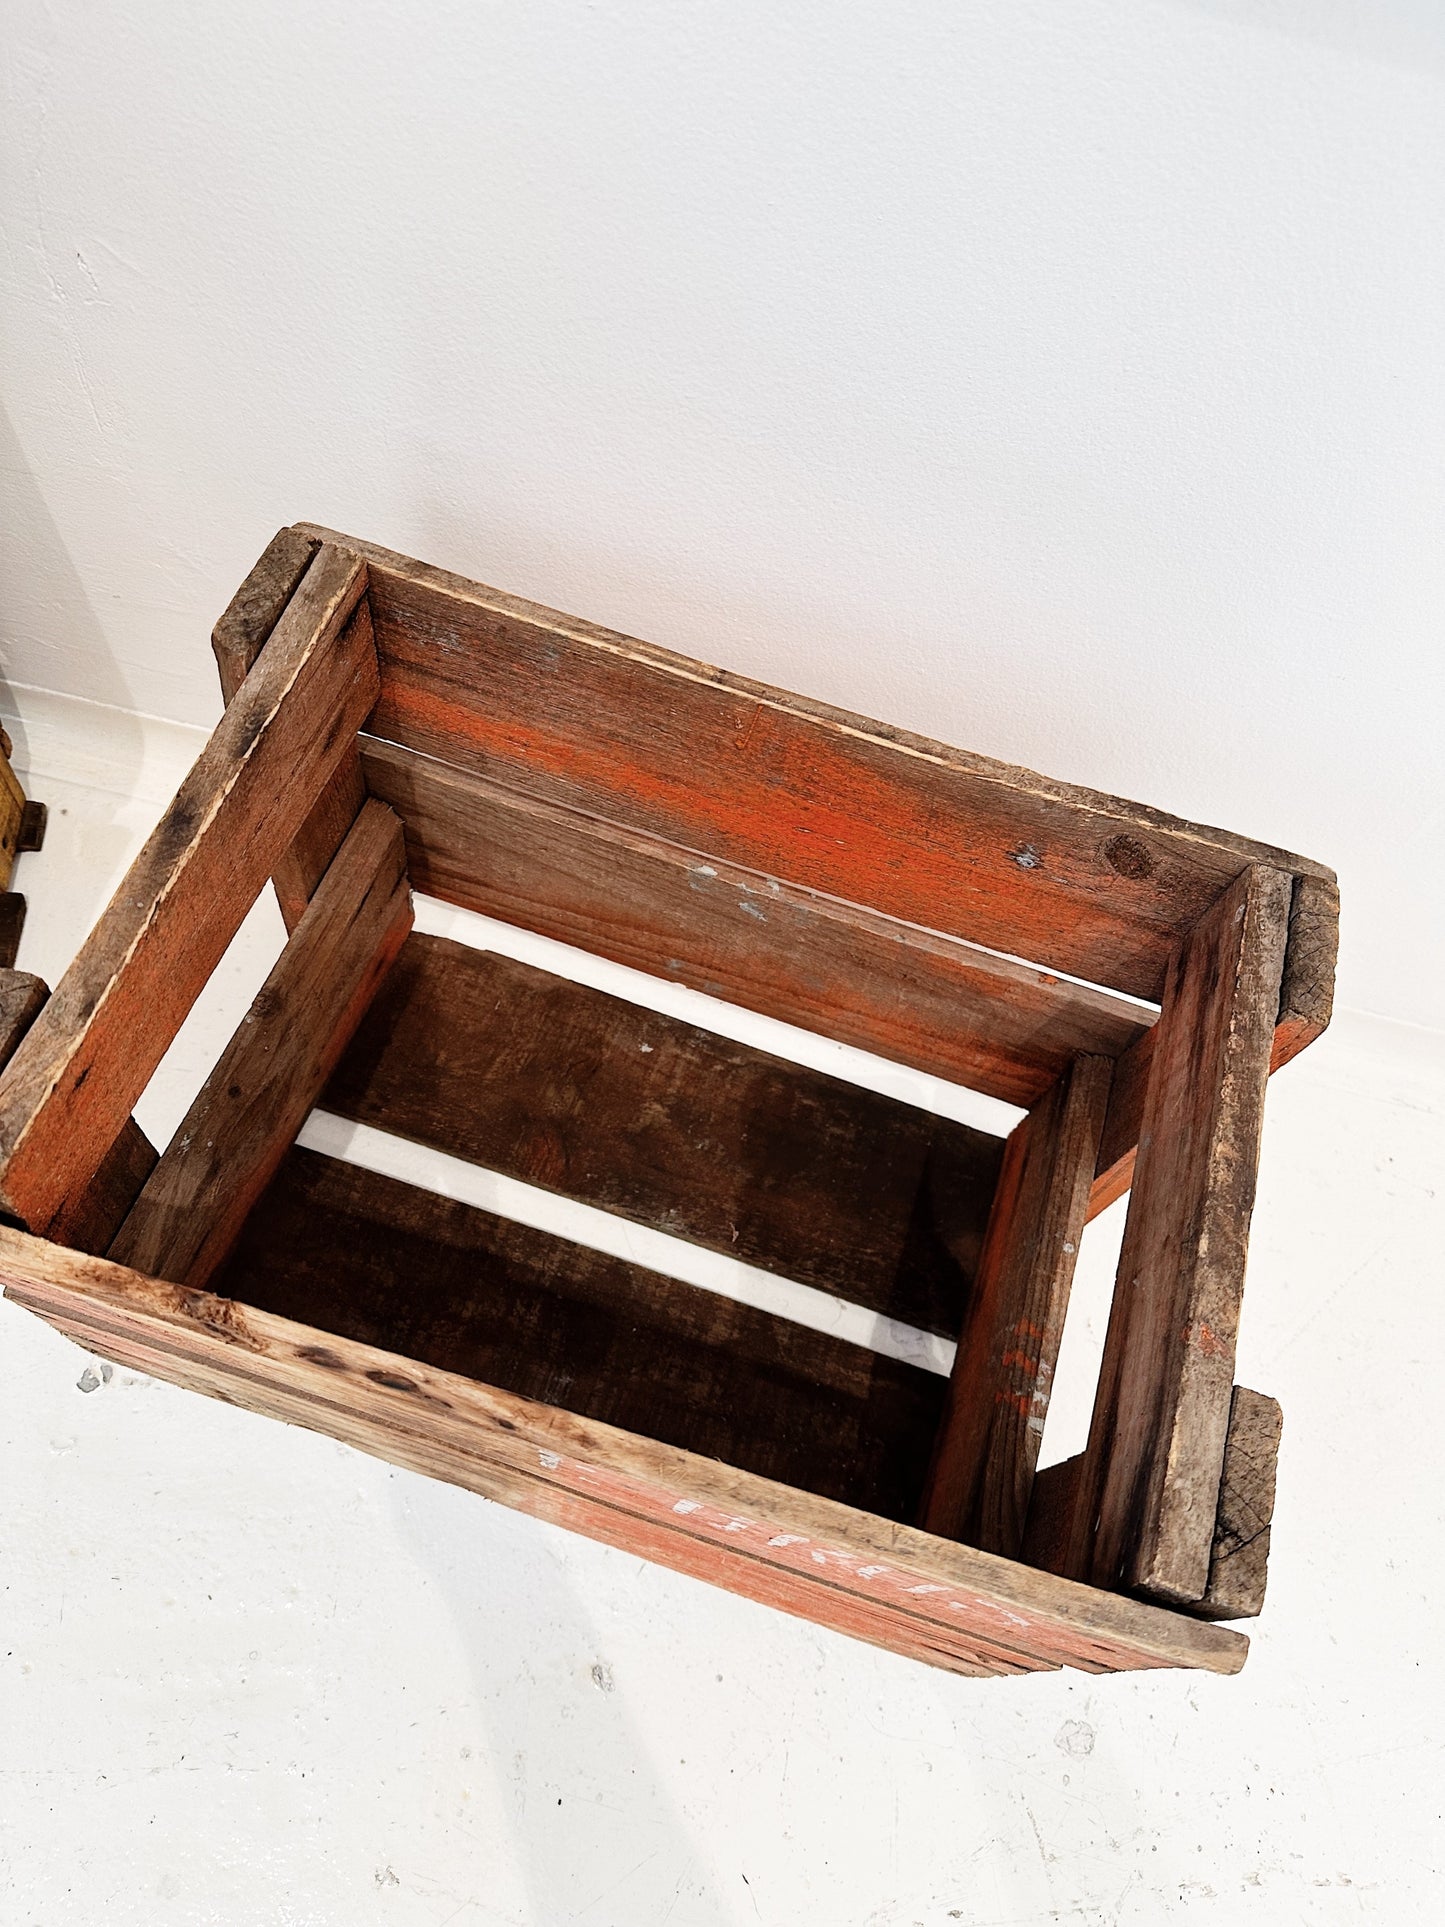 Vintage Soda Crate / 1 available